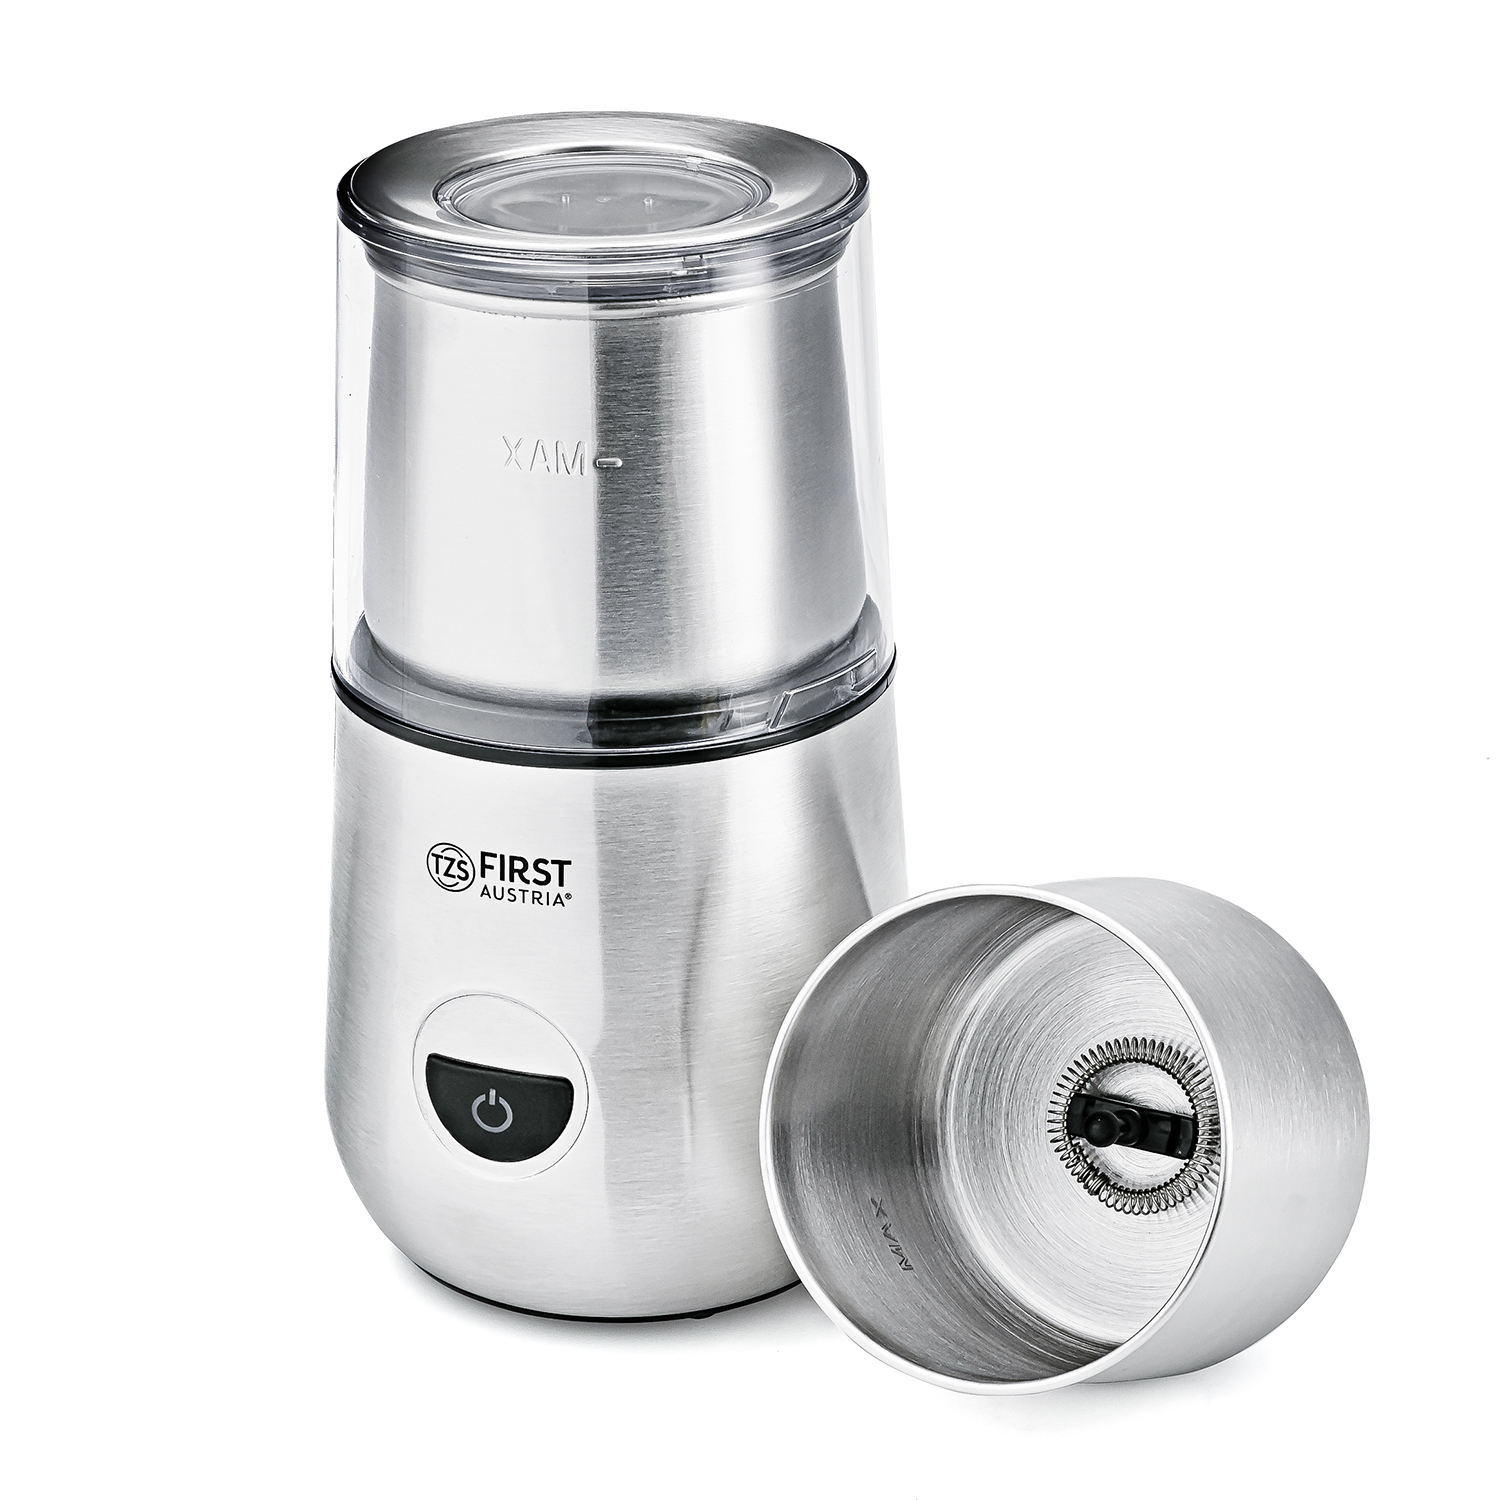 Coffee Grinder & Milk Frother 2in1 | 200W | Stainless Steel